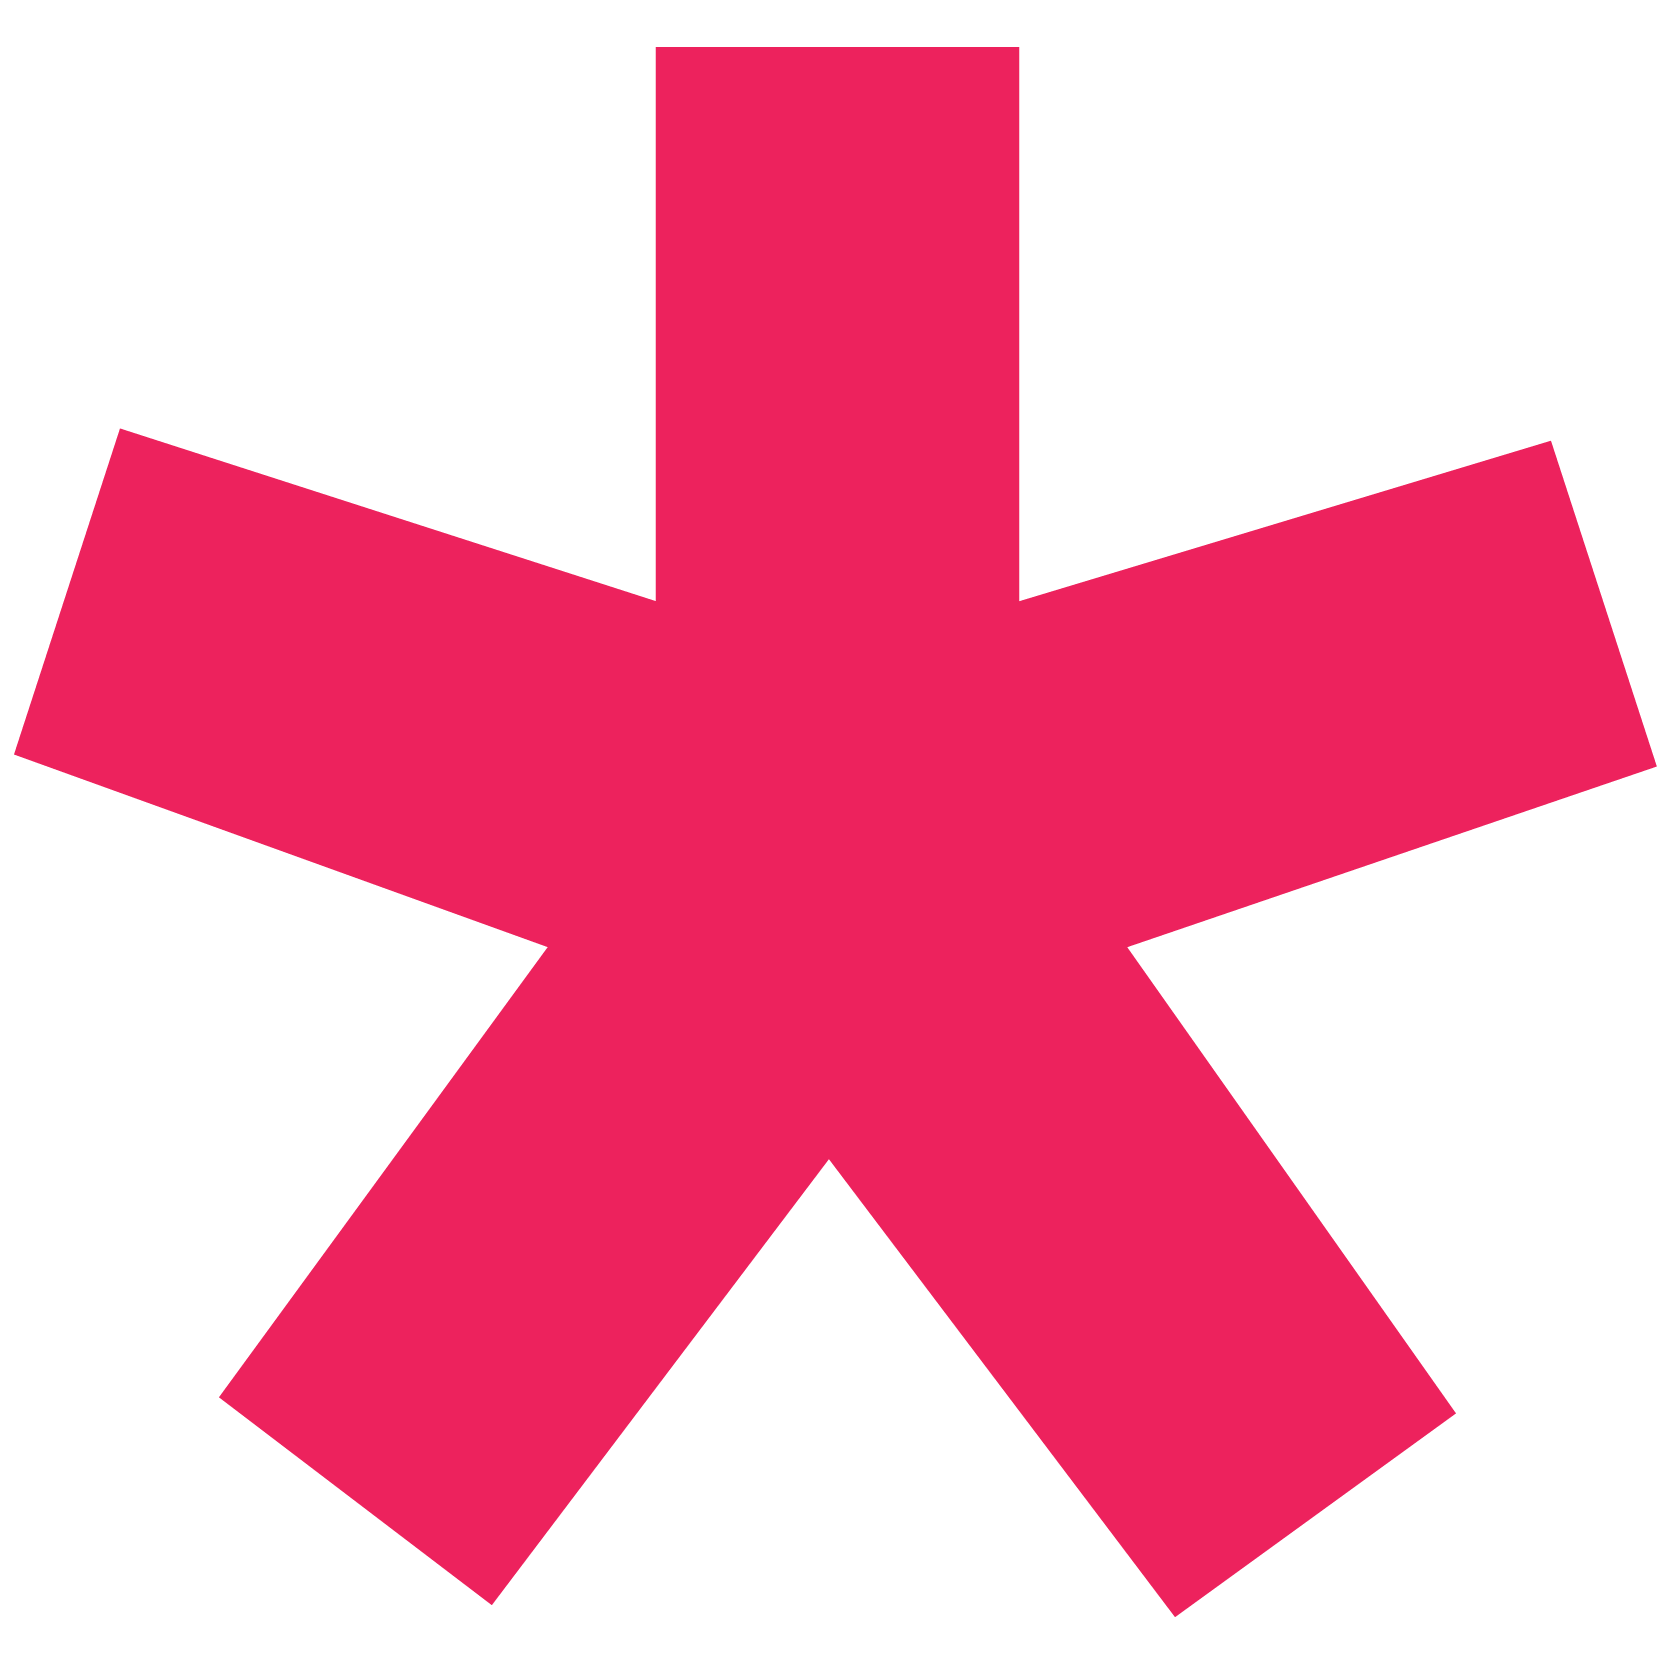 Asterisk Mark PNG -Datei